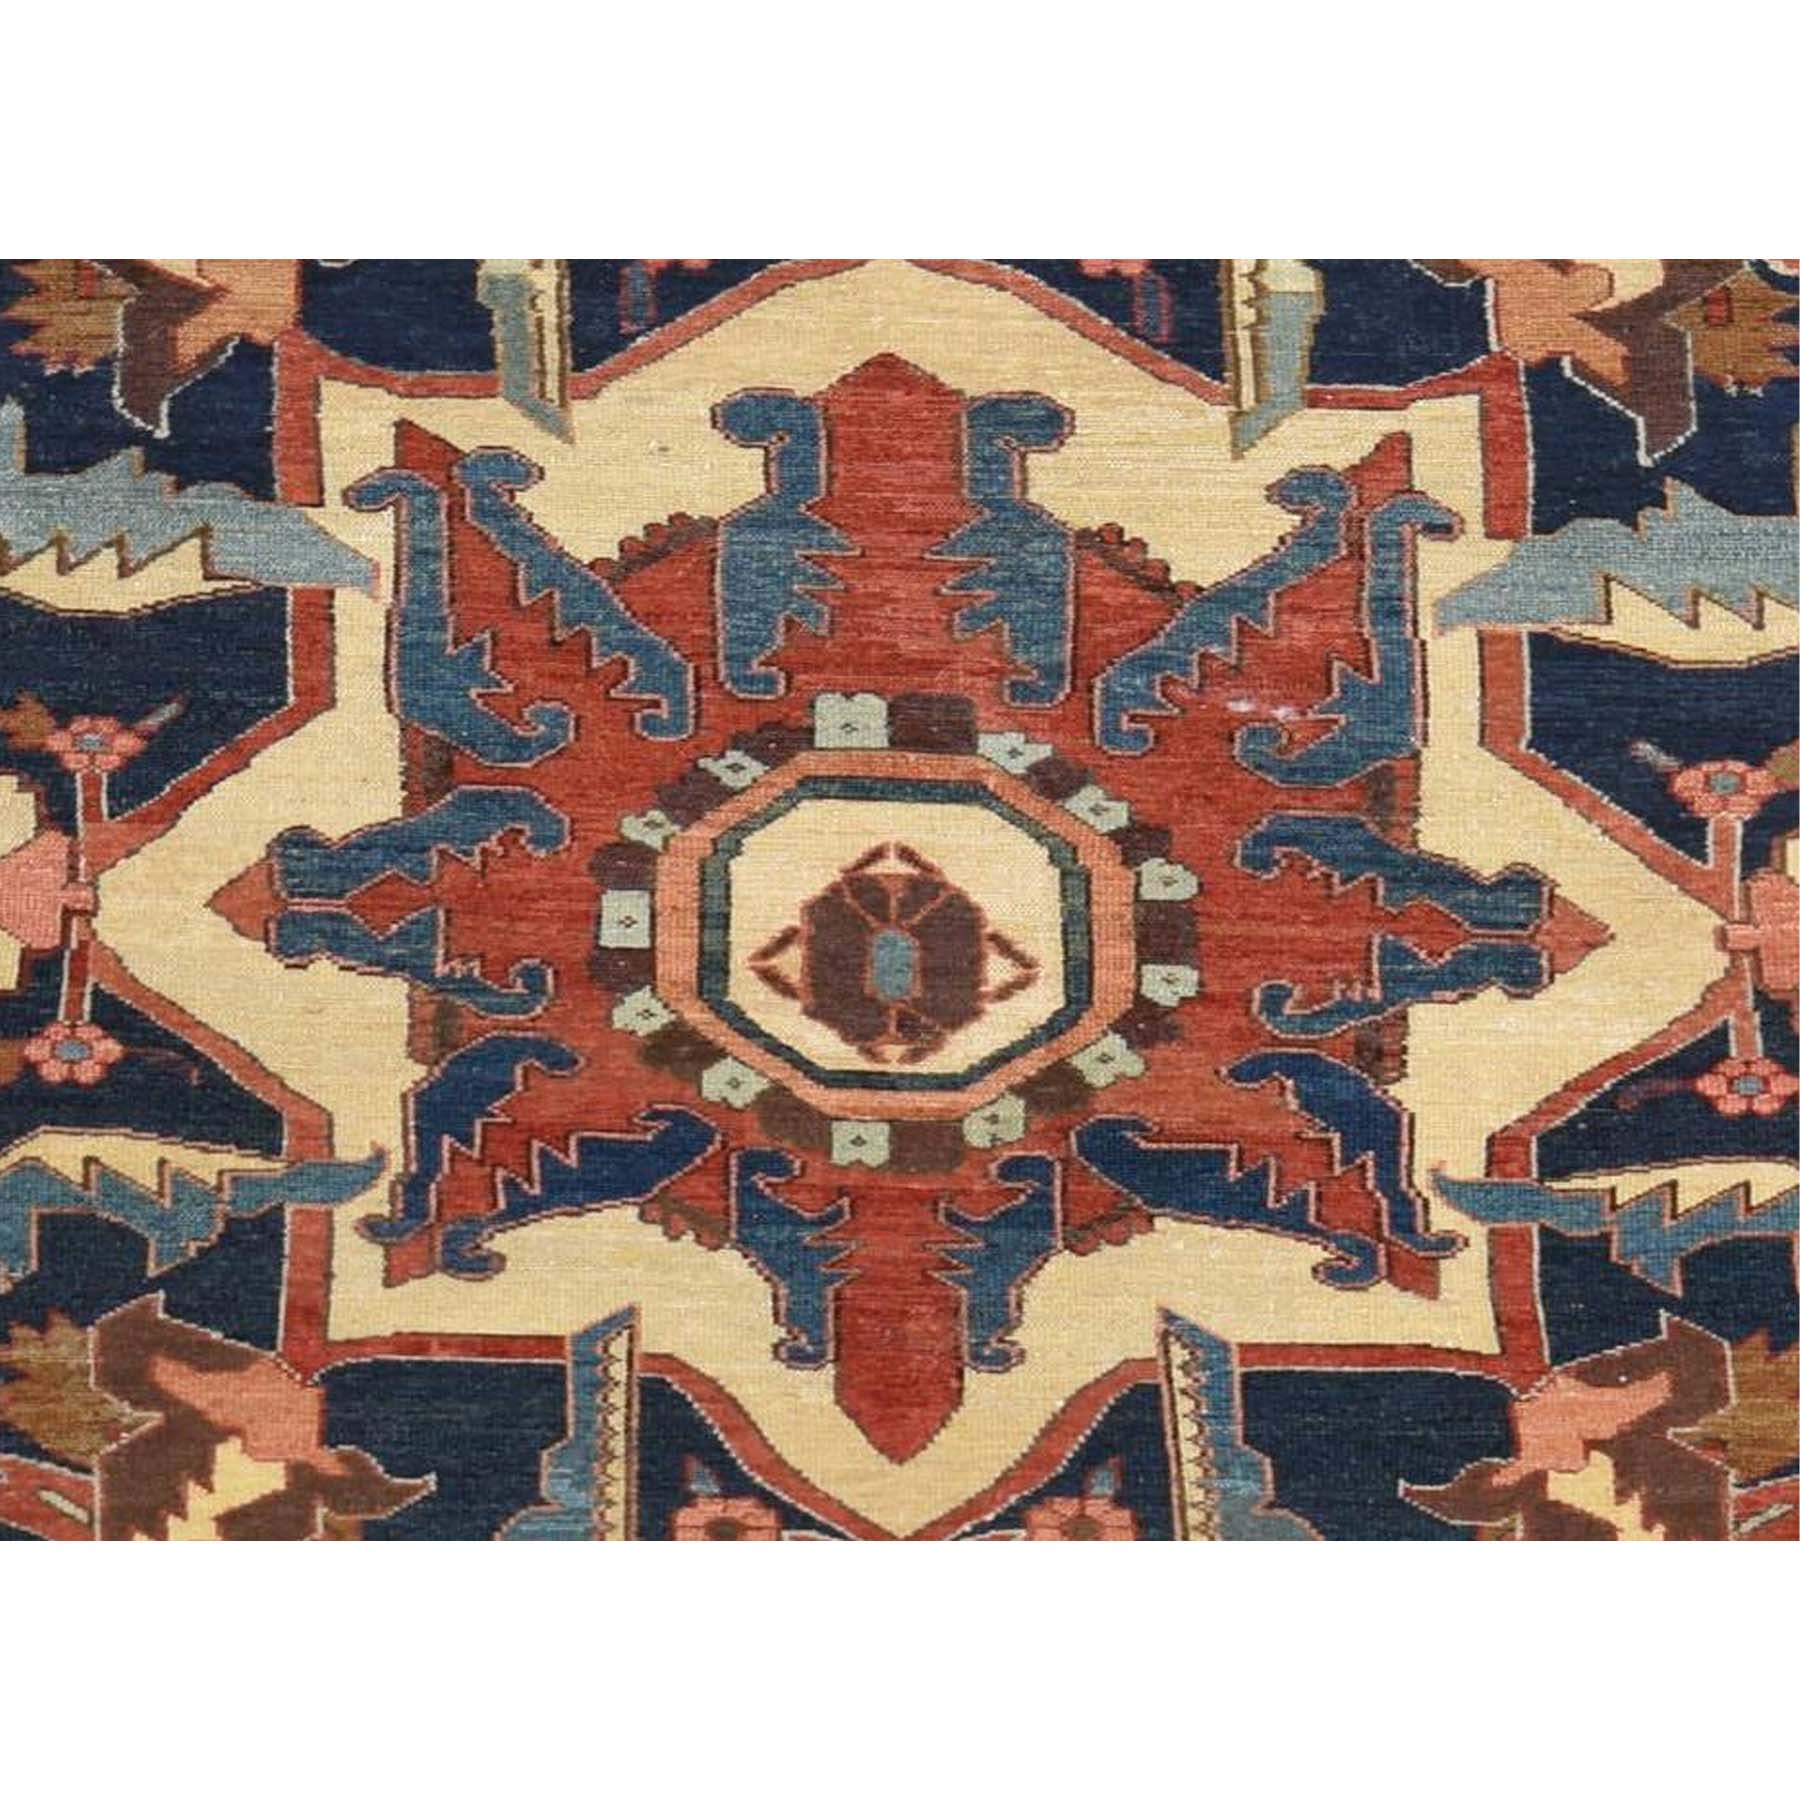 Antique-Hand-Knotted-Rug-391200